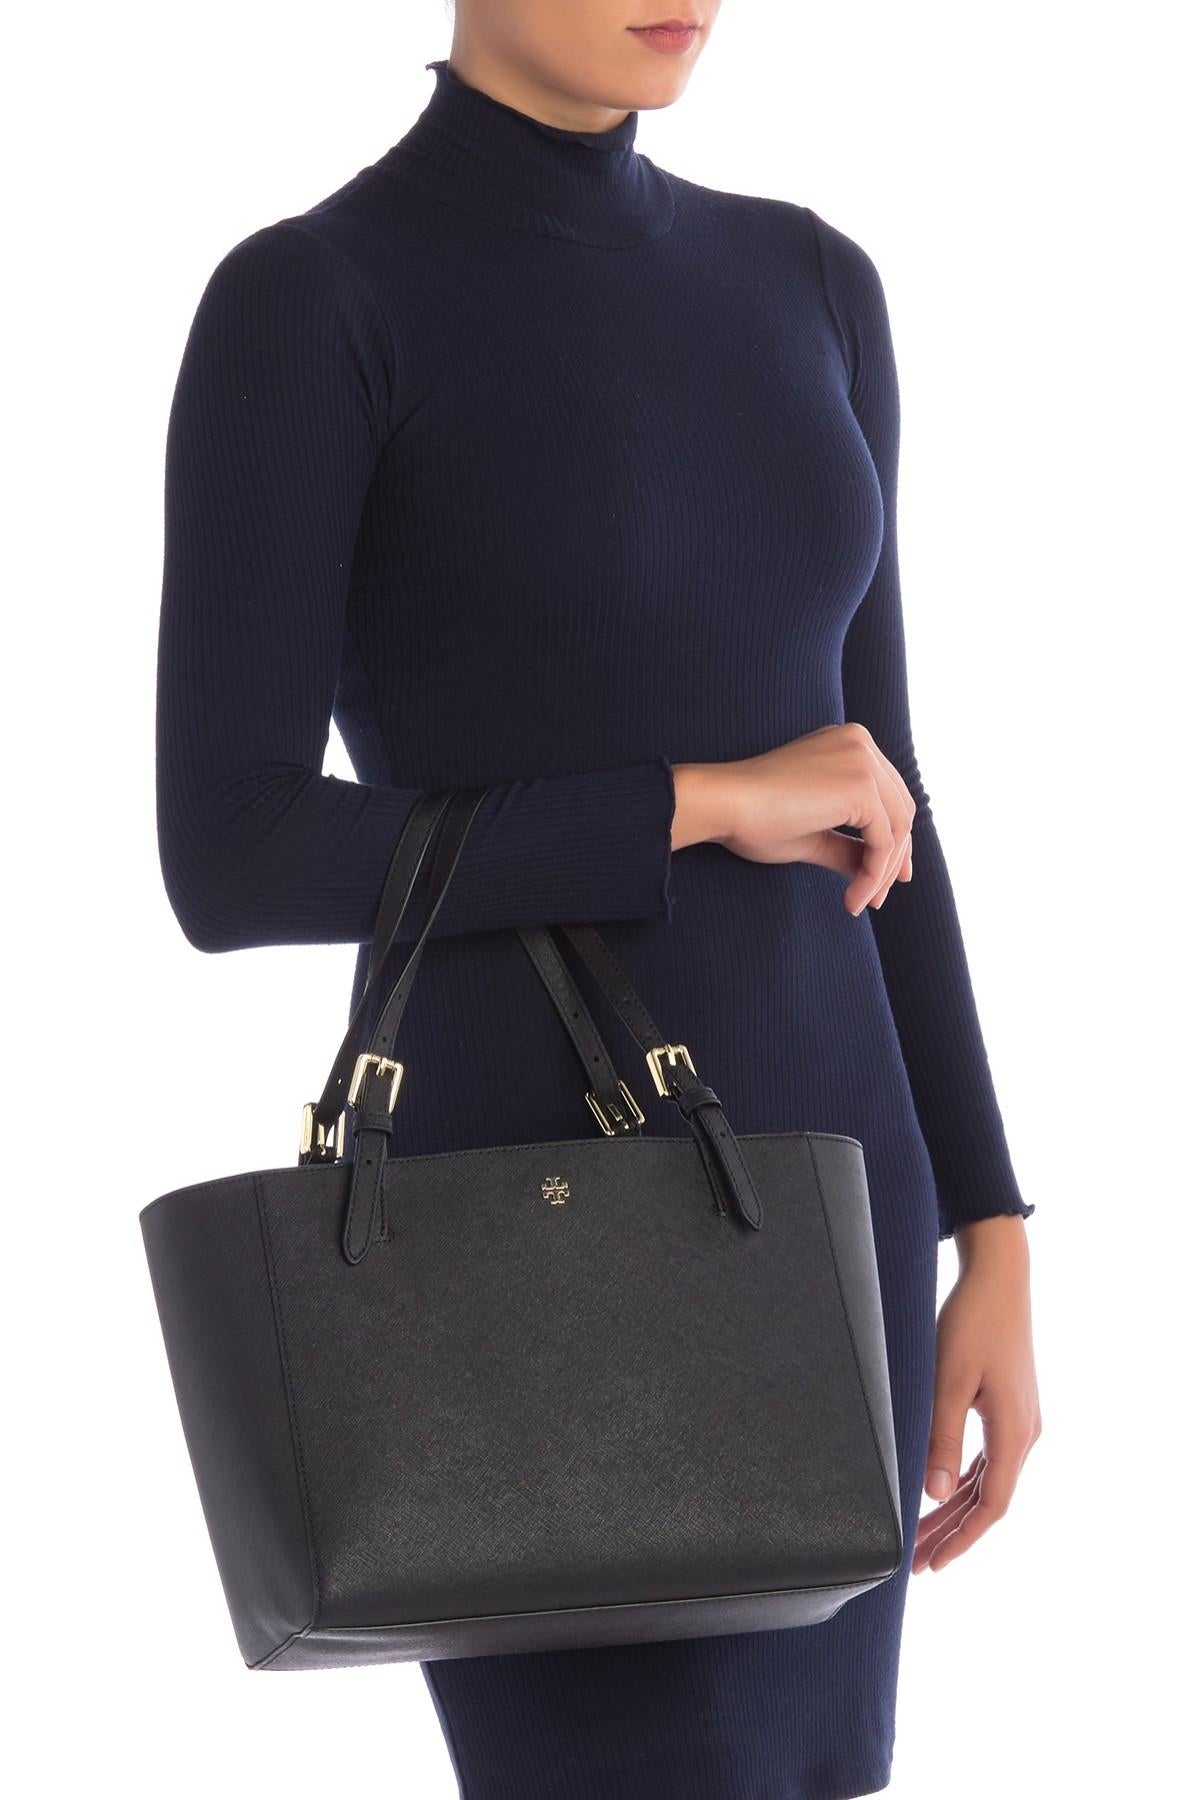 ❌SOLD OUT❌ Tory Burch Emerson small top zip tote in black